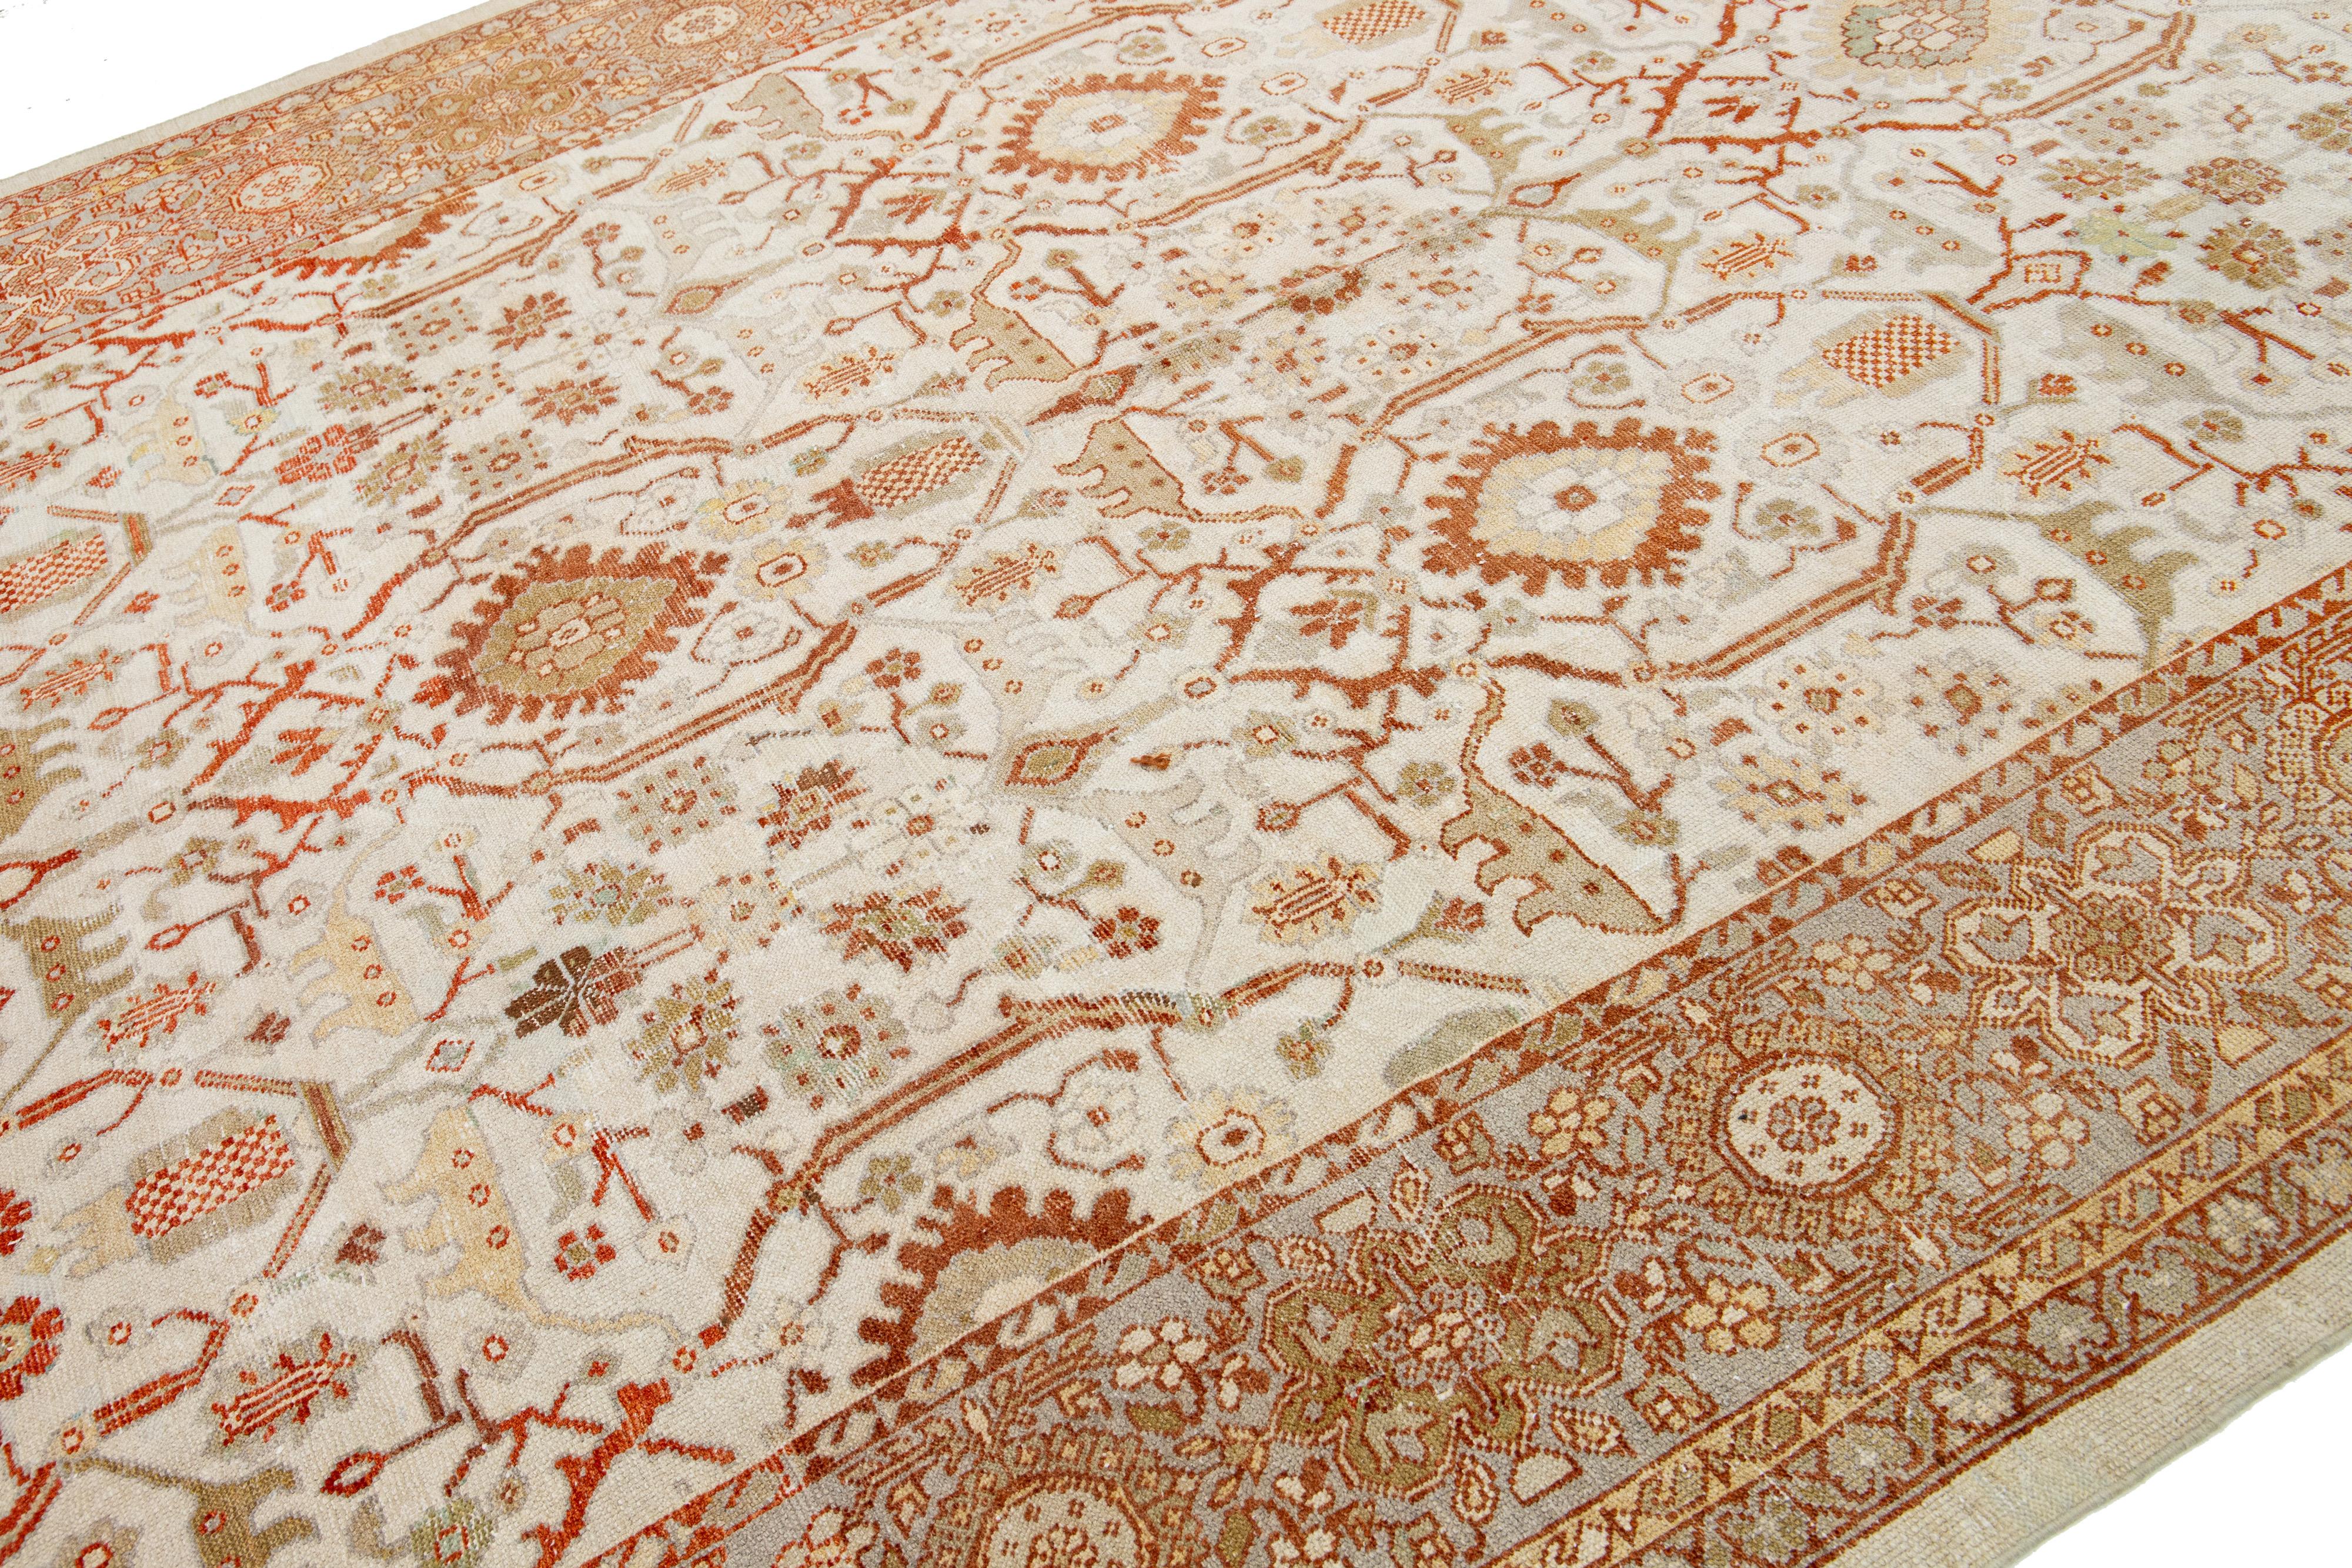 Islamic 1900s Sultanabad Persian Gallery Wool Rug In Beige and Orange With Floral Motif For Sale